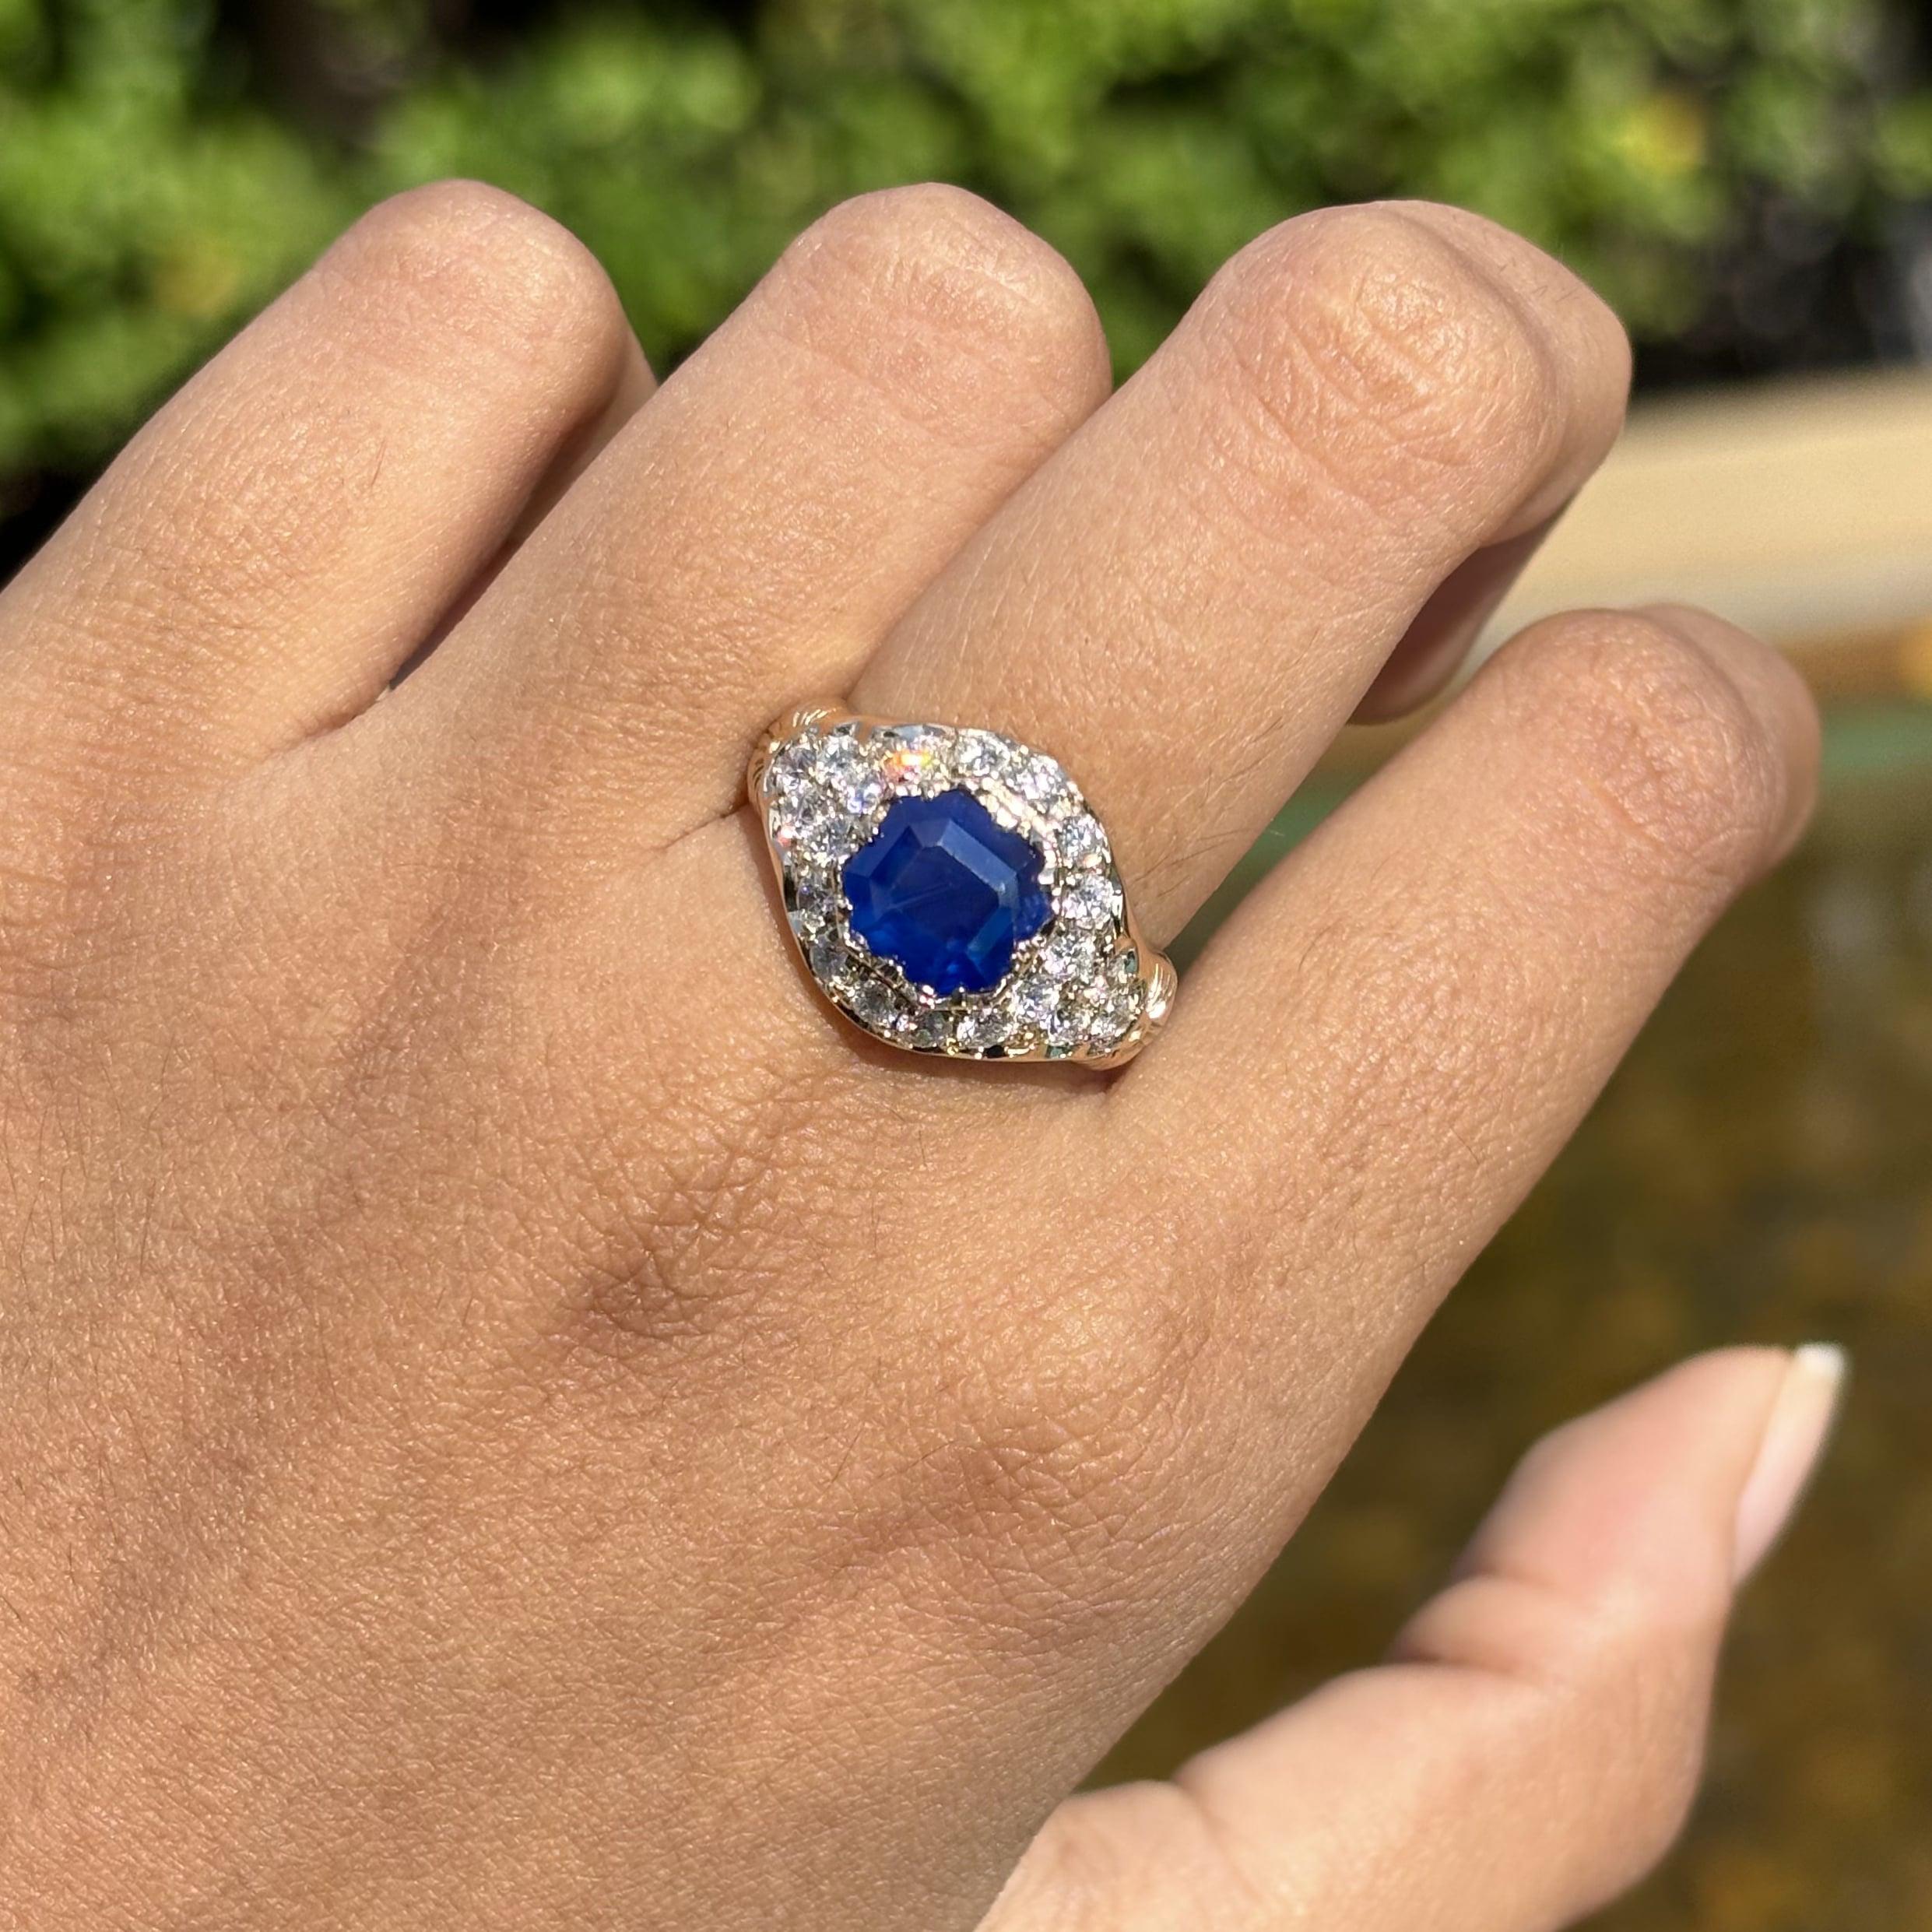   2.64 Carat Royal Blue Sapphire Ring with Old Mine Cut Diamonds in 18K Gold 5